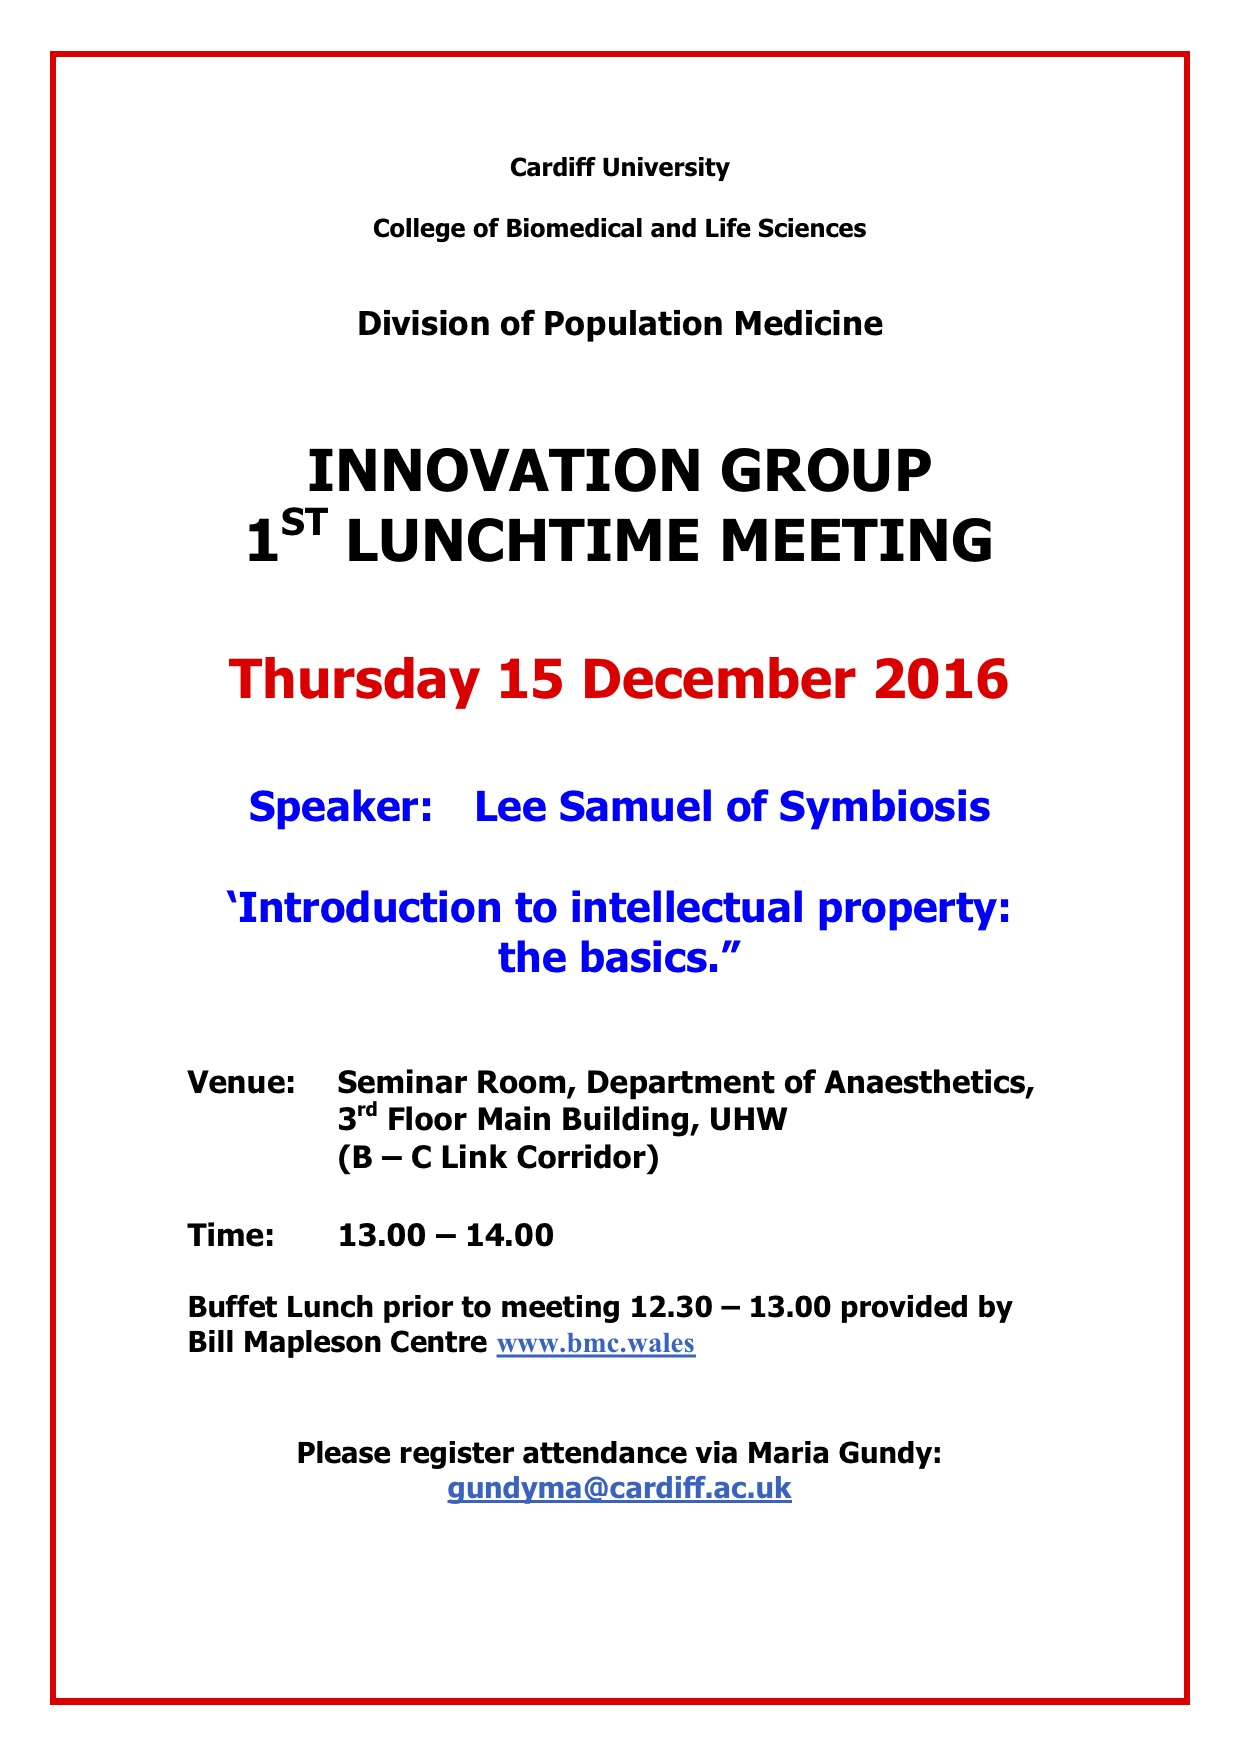 innovation-group-meeting-15-12-16